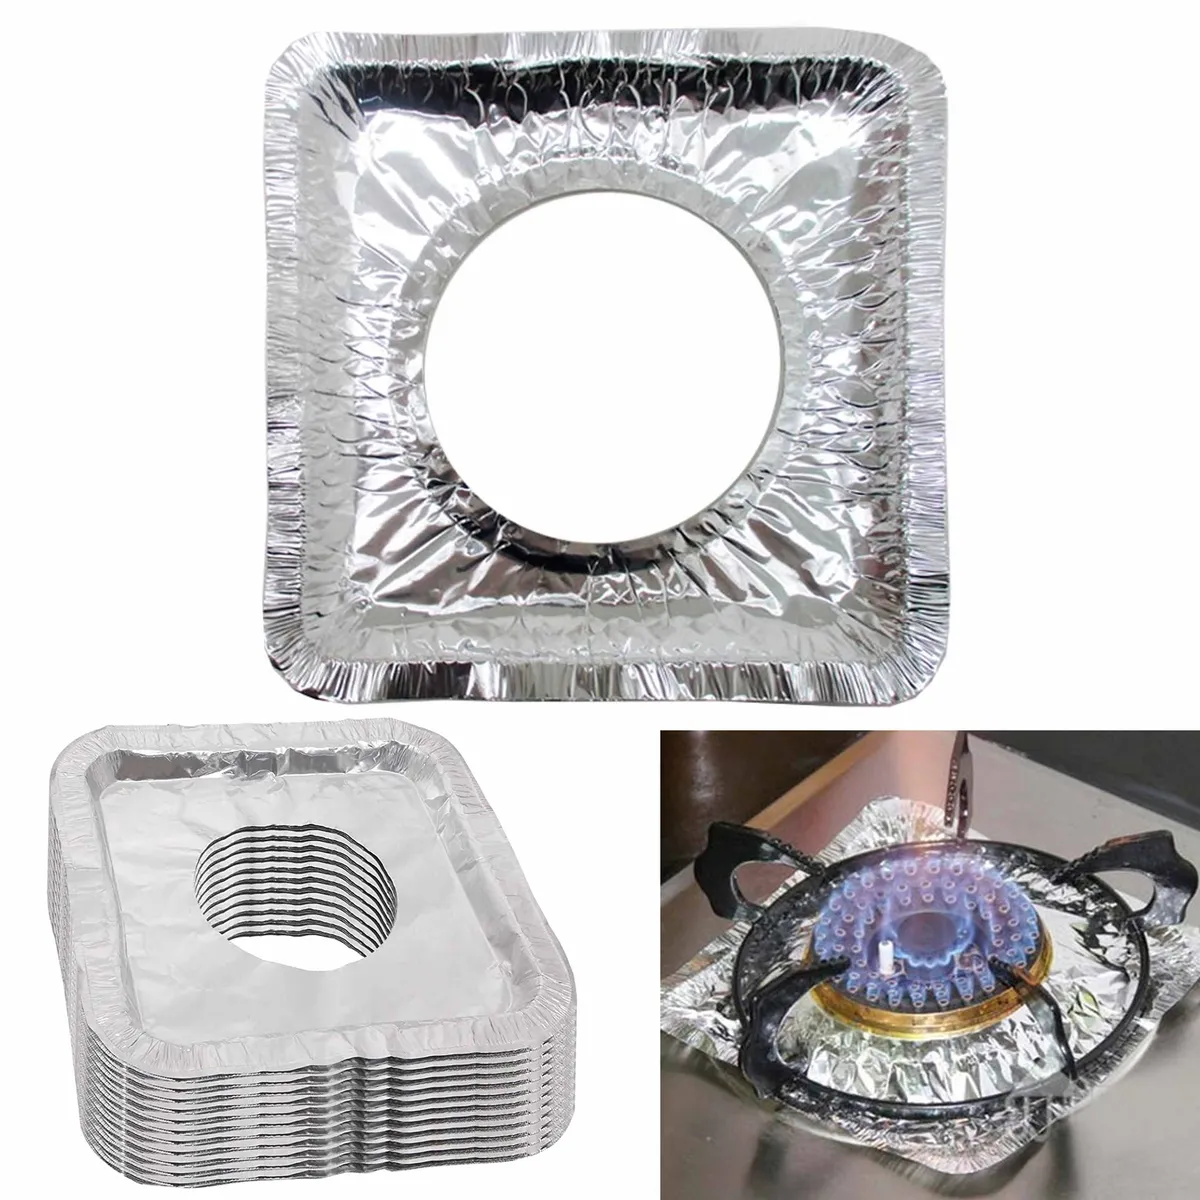 Gas Stove Burner Covers Disposable Aluminum Foil Gas Stove Liners